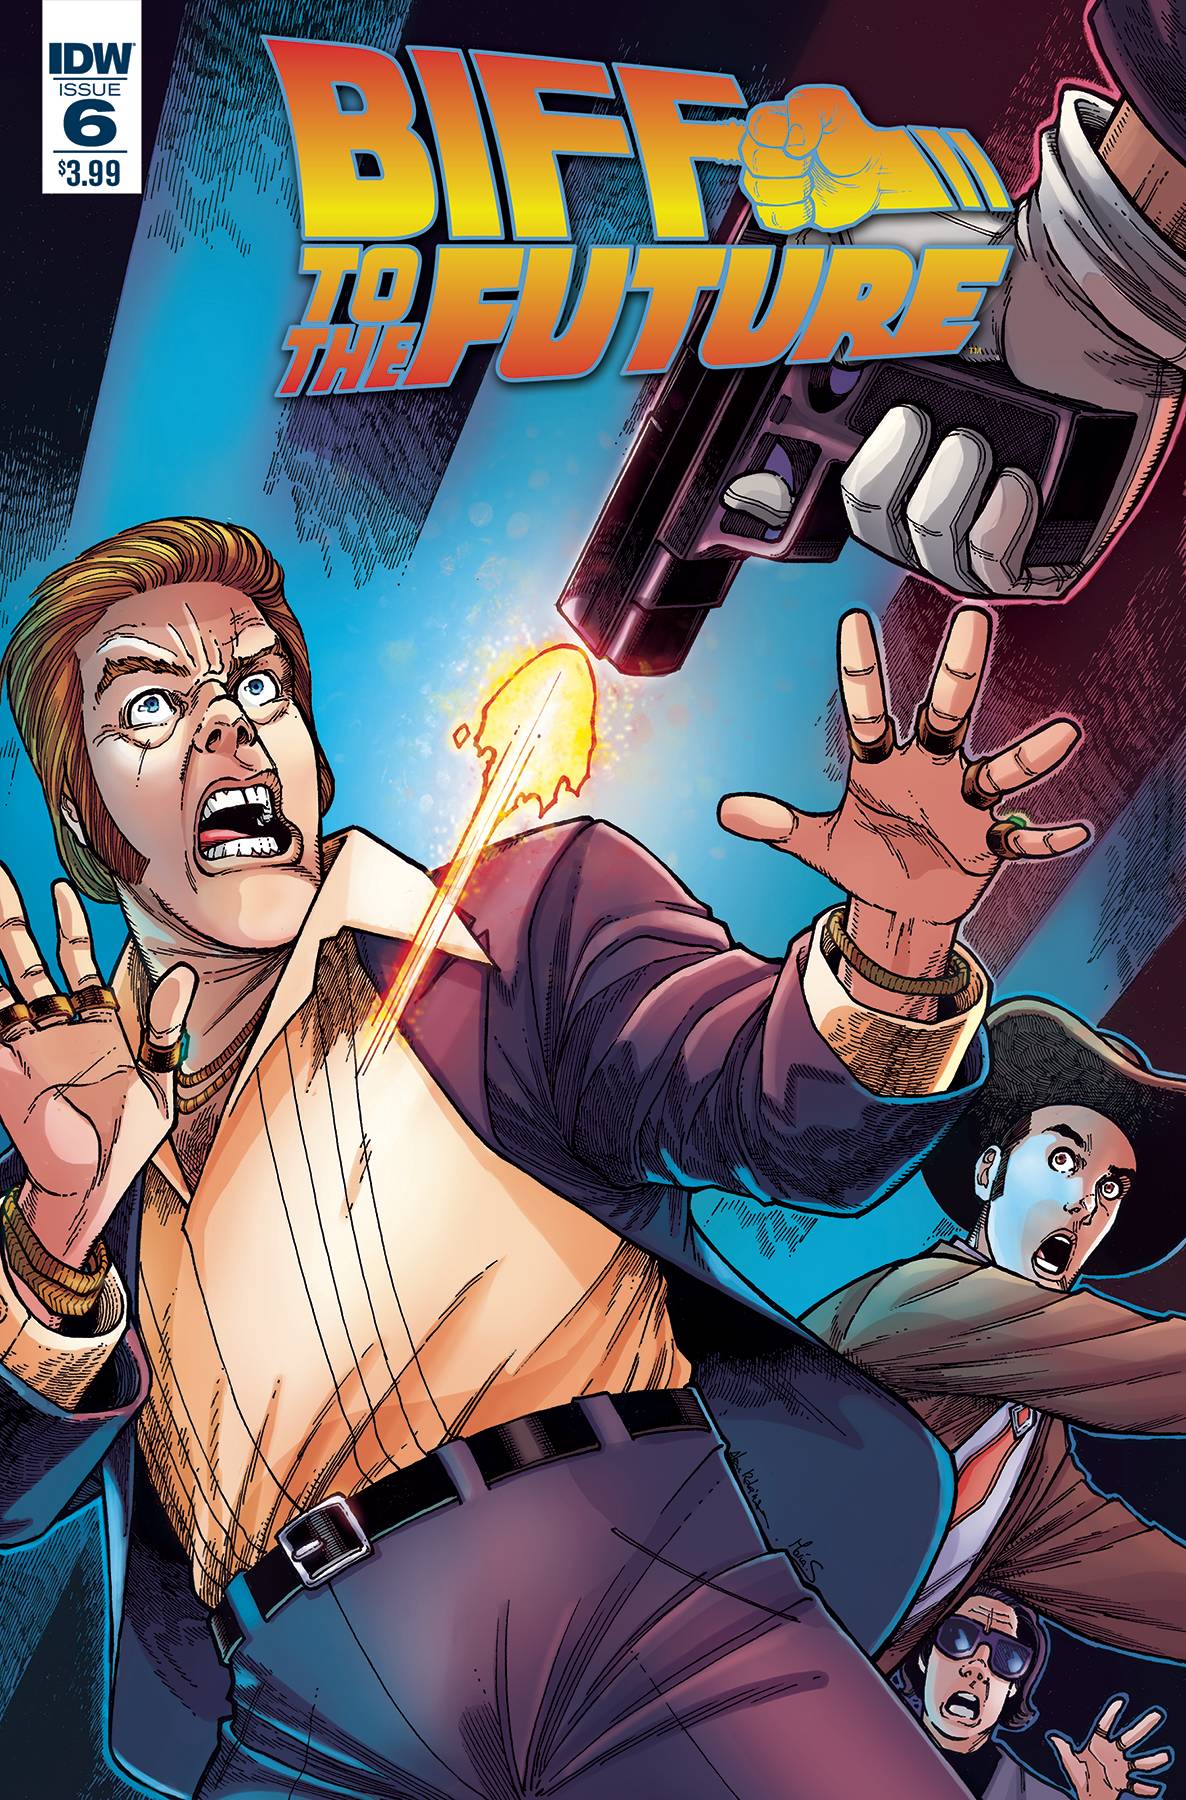 Back To the Future Biff To the Future #6